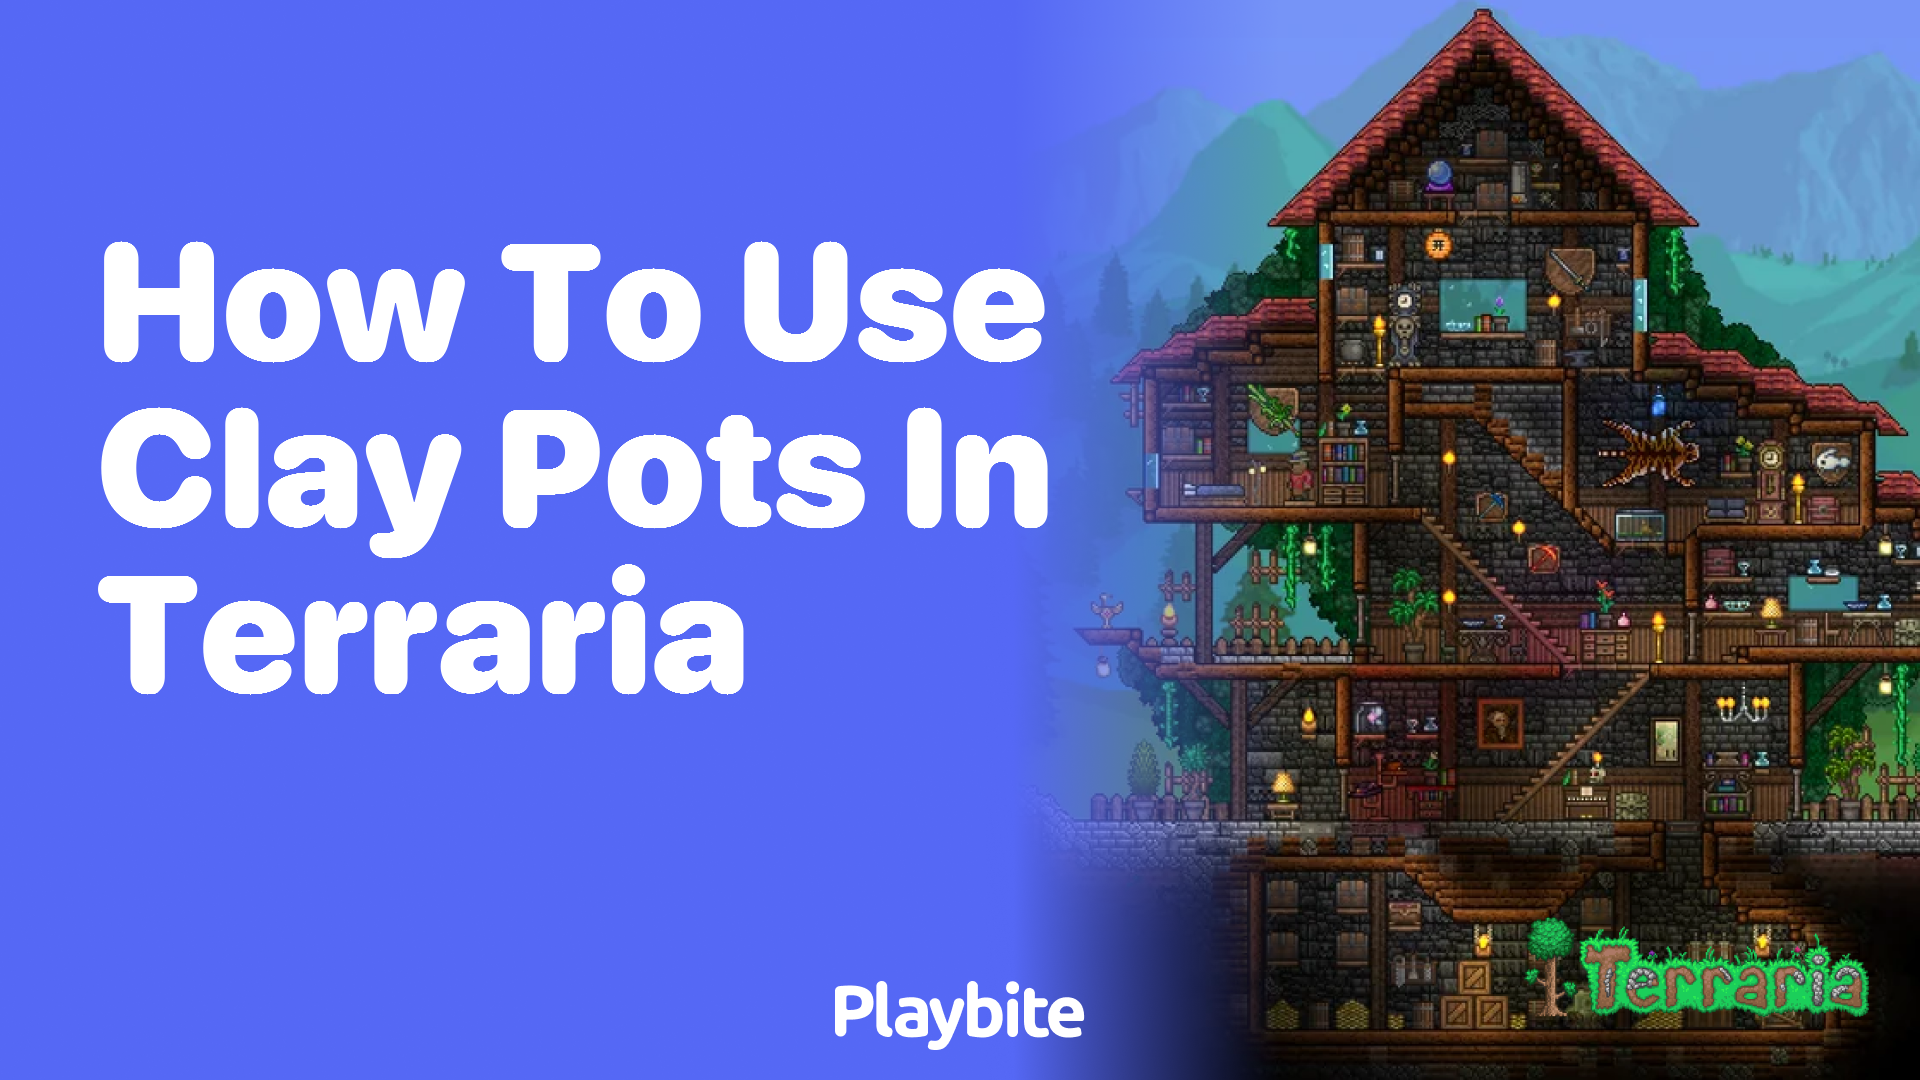 How to Use Clay Pots in Terraria